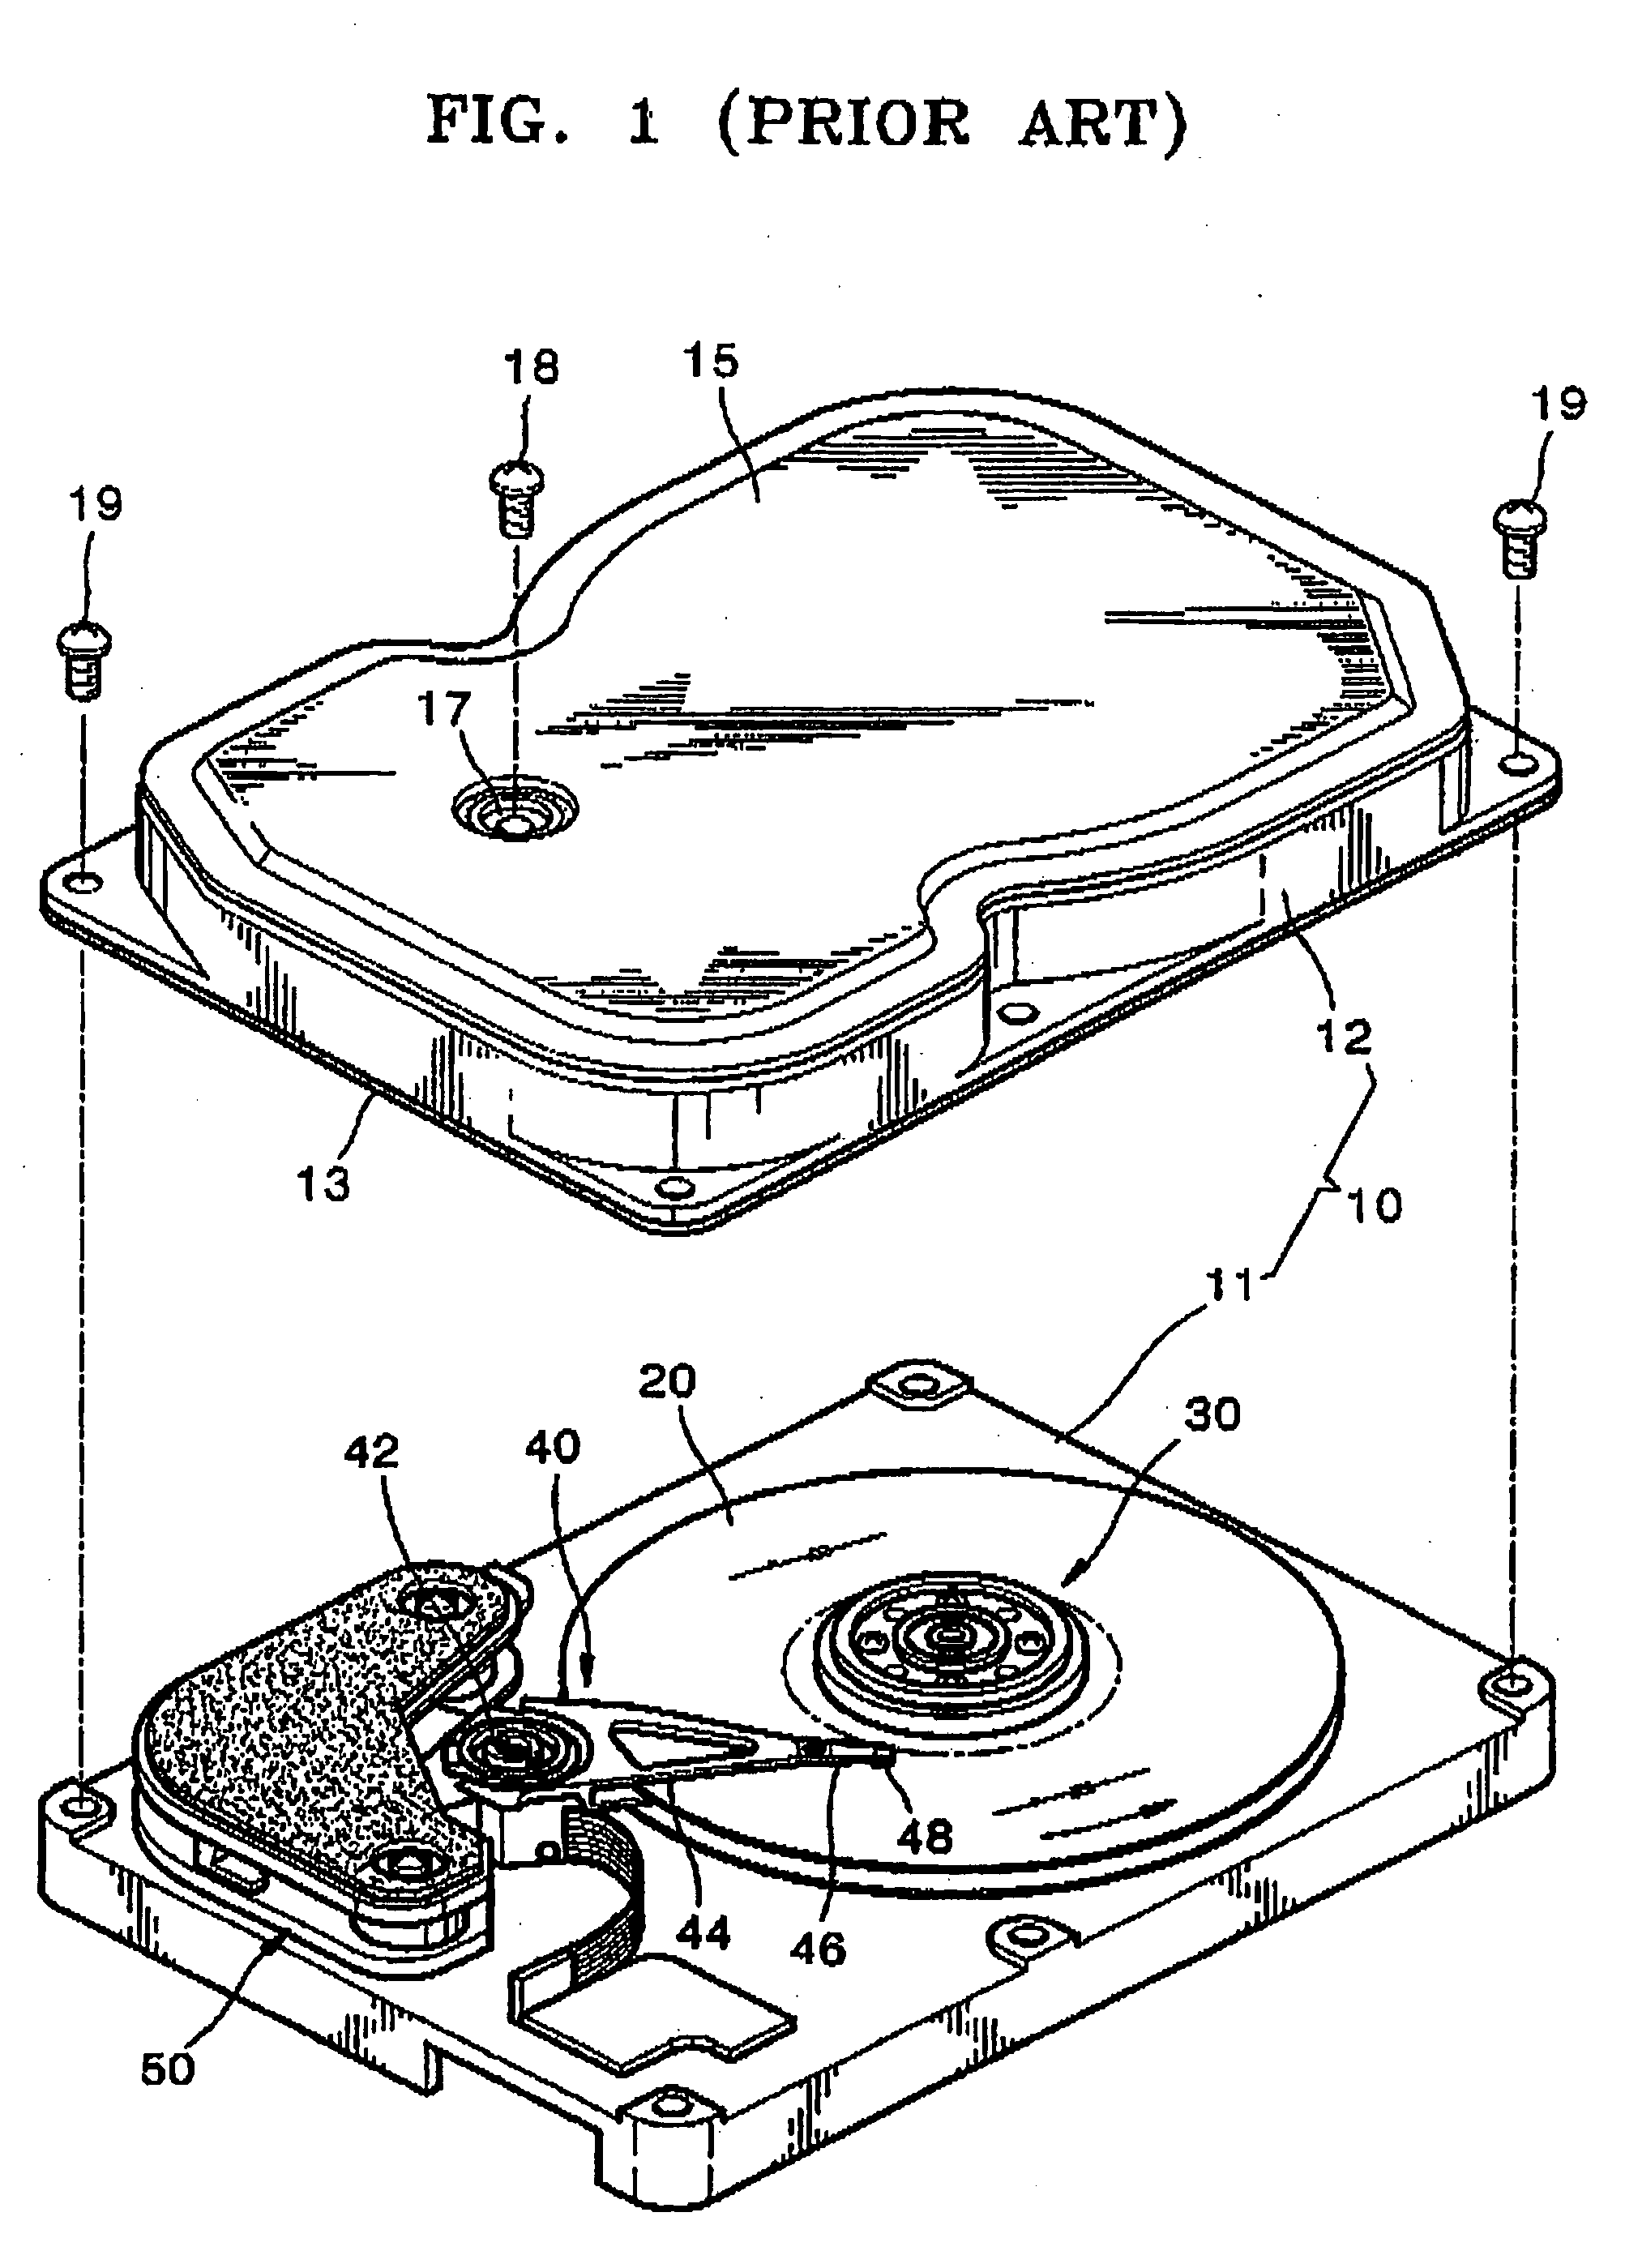 Hard disk drive with damping plate